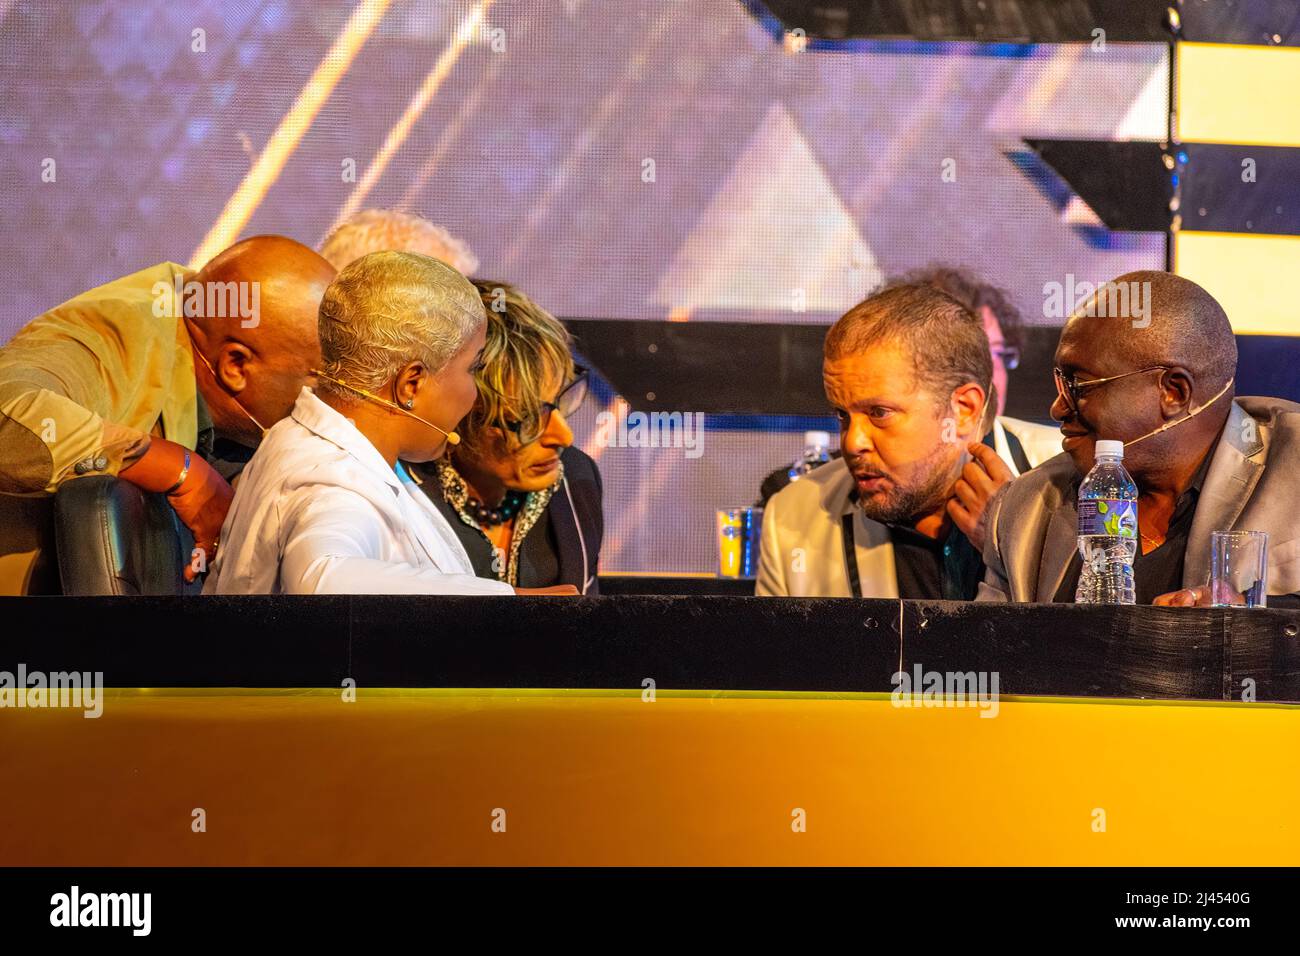 National jury deliberates during the show. In white, Haila Maria Mompie. In the center, Jorgito Caramba. Speaking, David Torrens. The event is held in Stock Photo